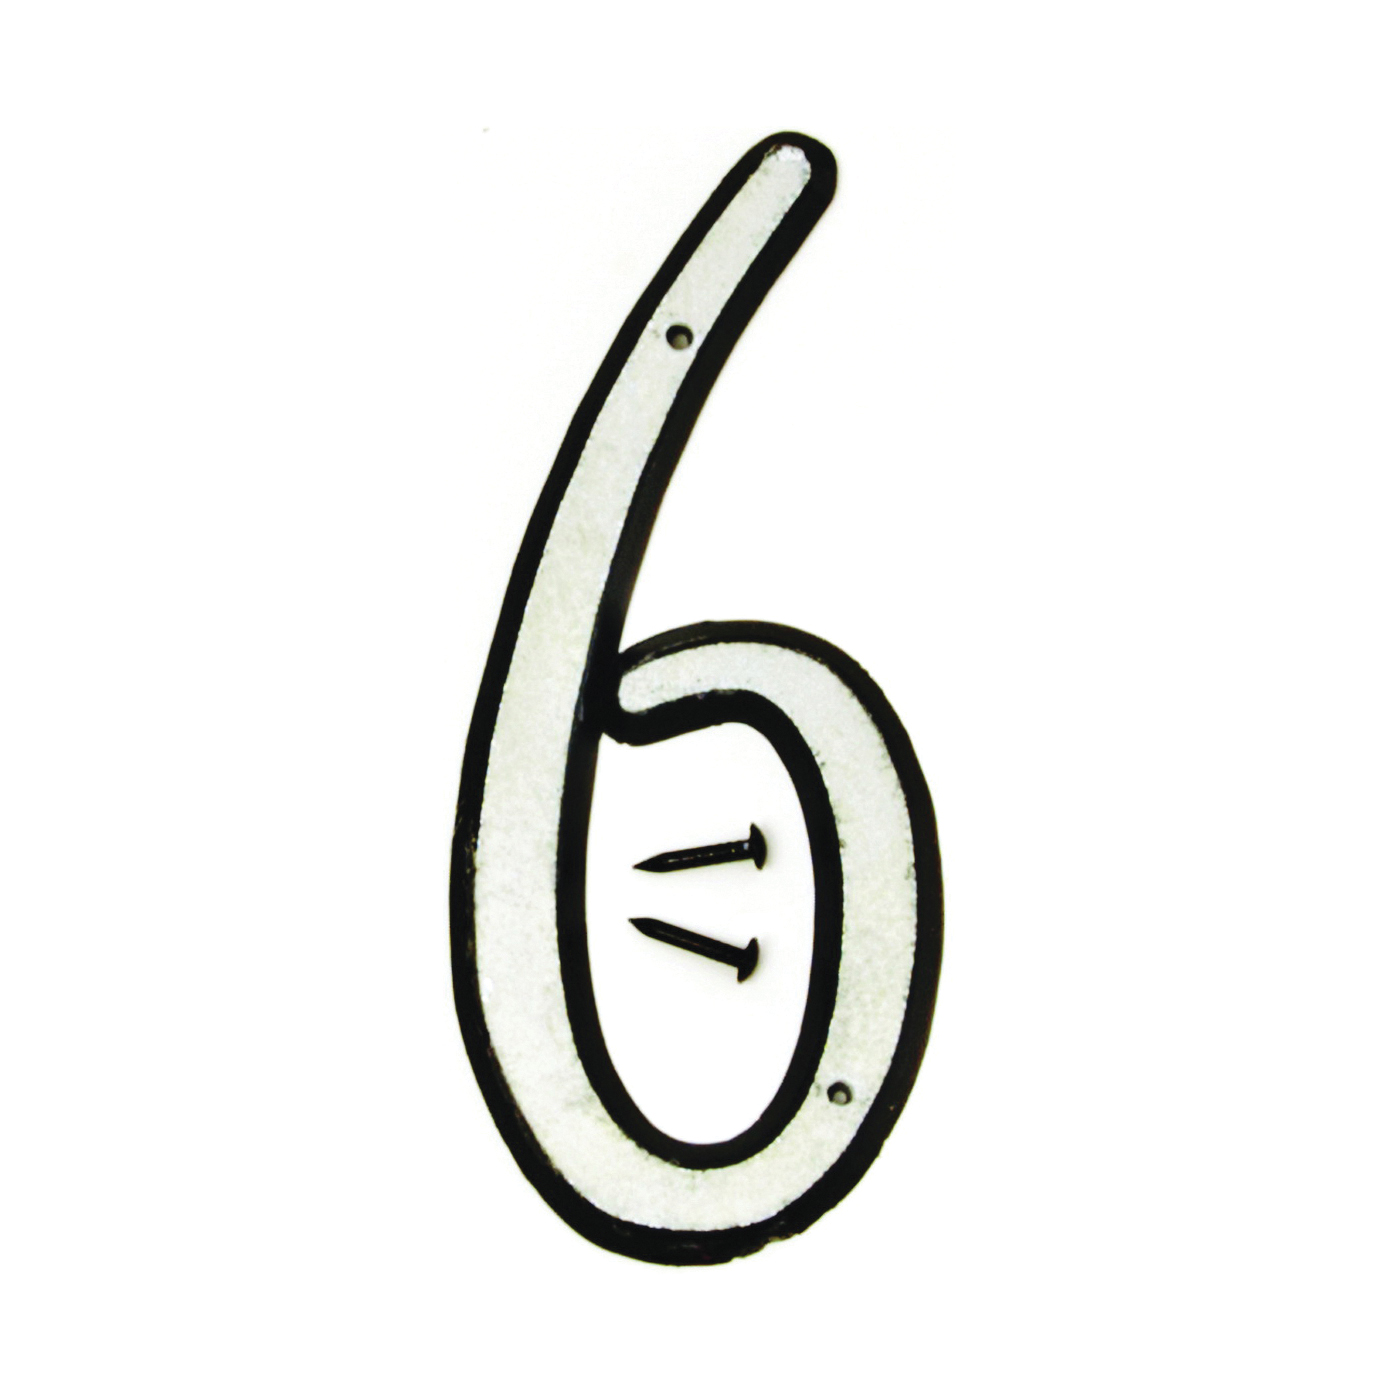 30600 Series 30606 House Number, Character: 6, 4 in H Character, Black/White Character, Plastic